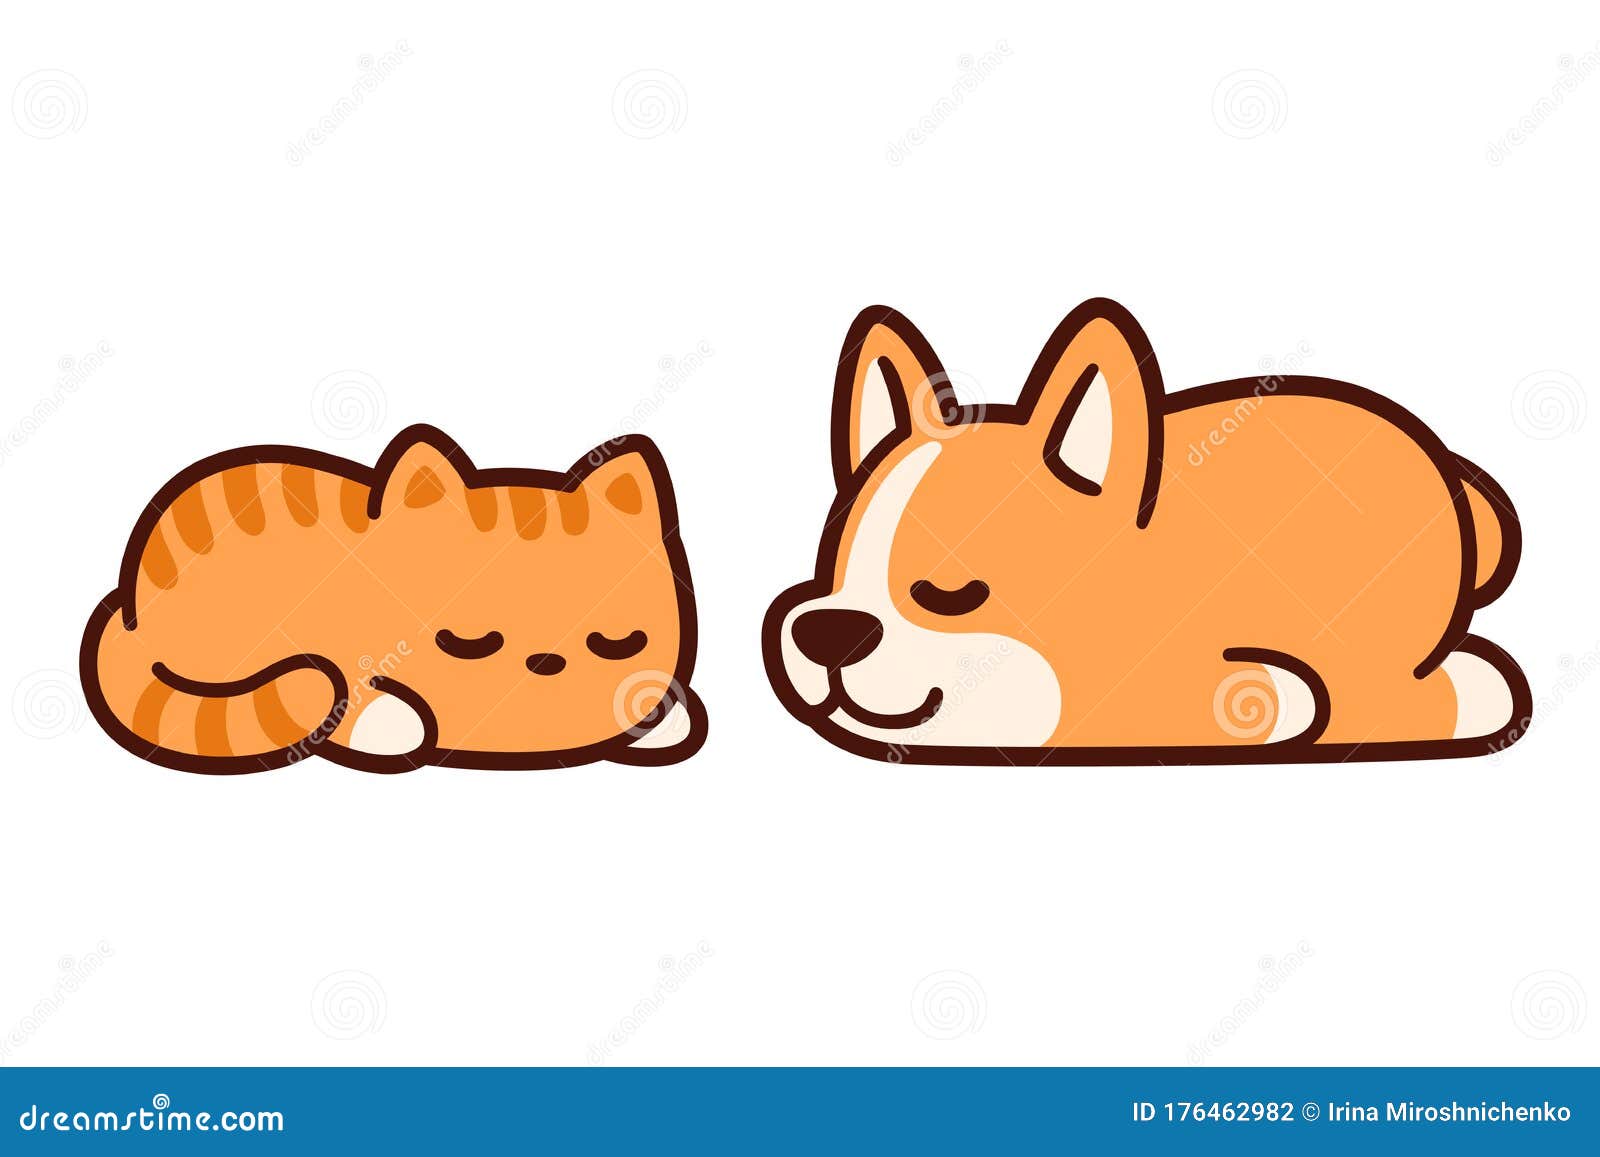 Cute sleeping cat and dog stock vector. Illustration of character